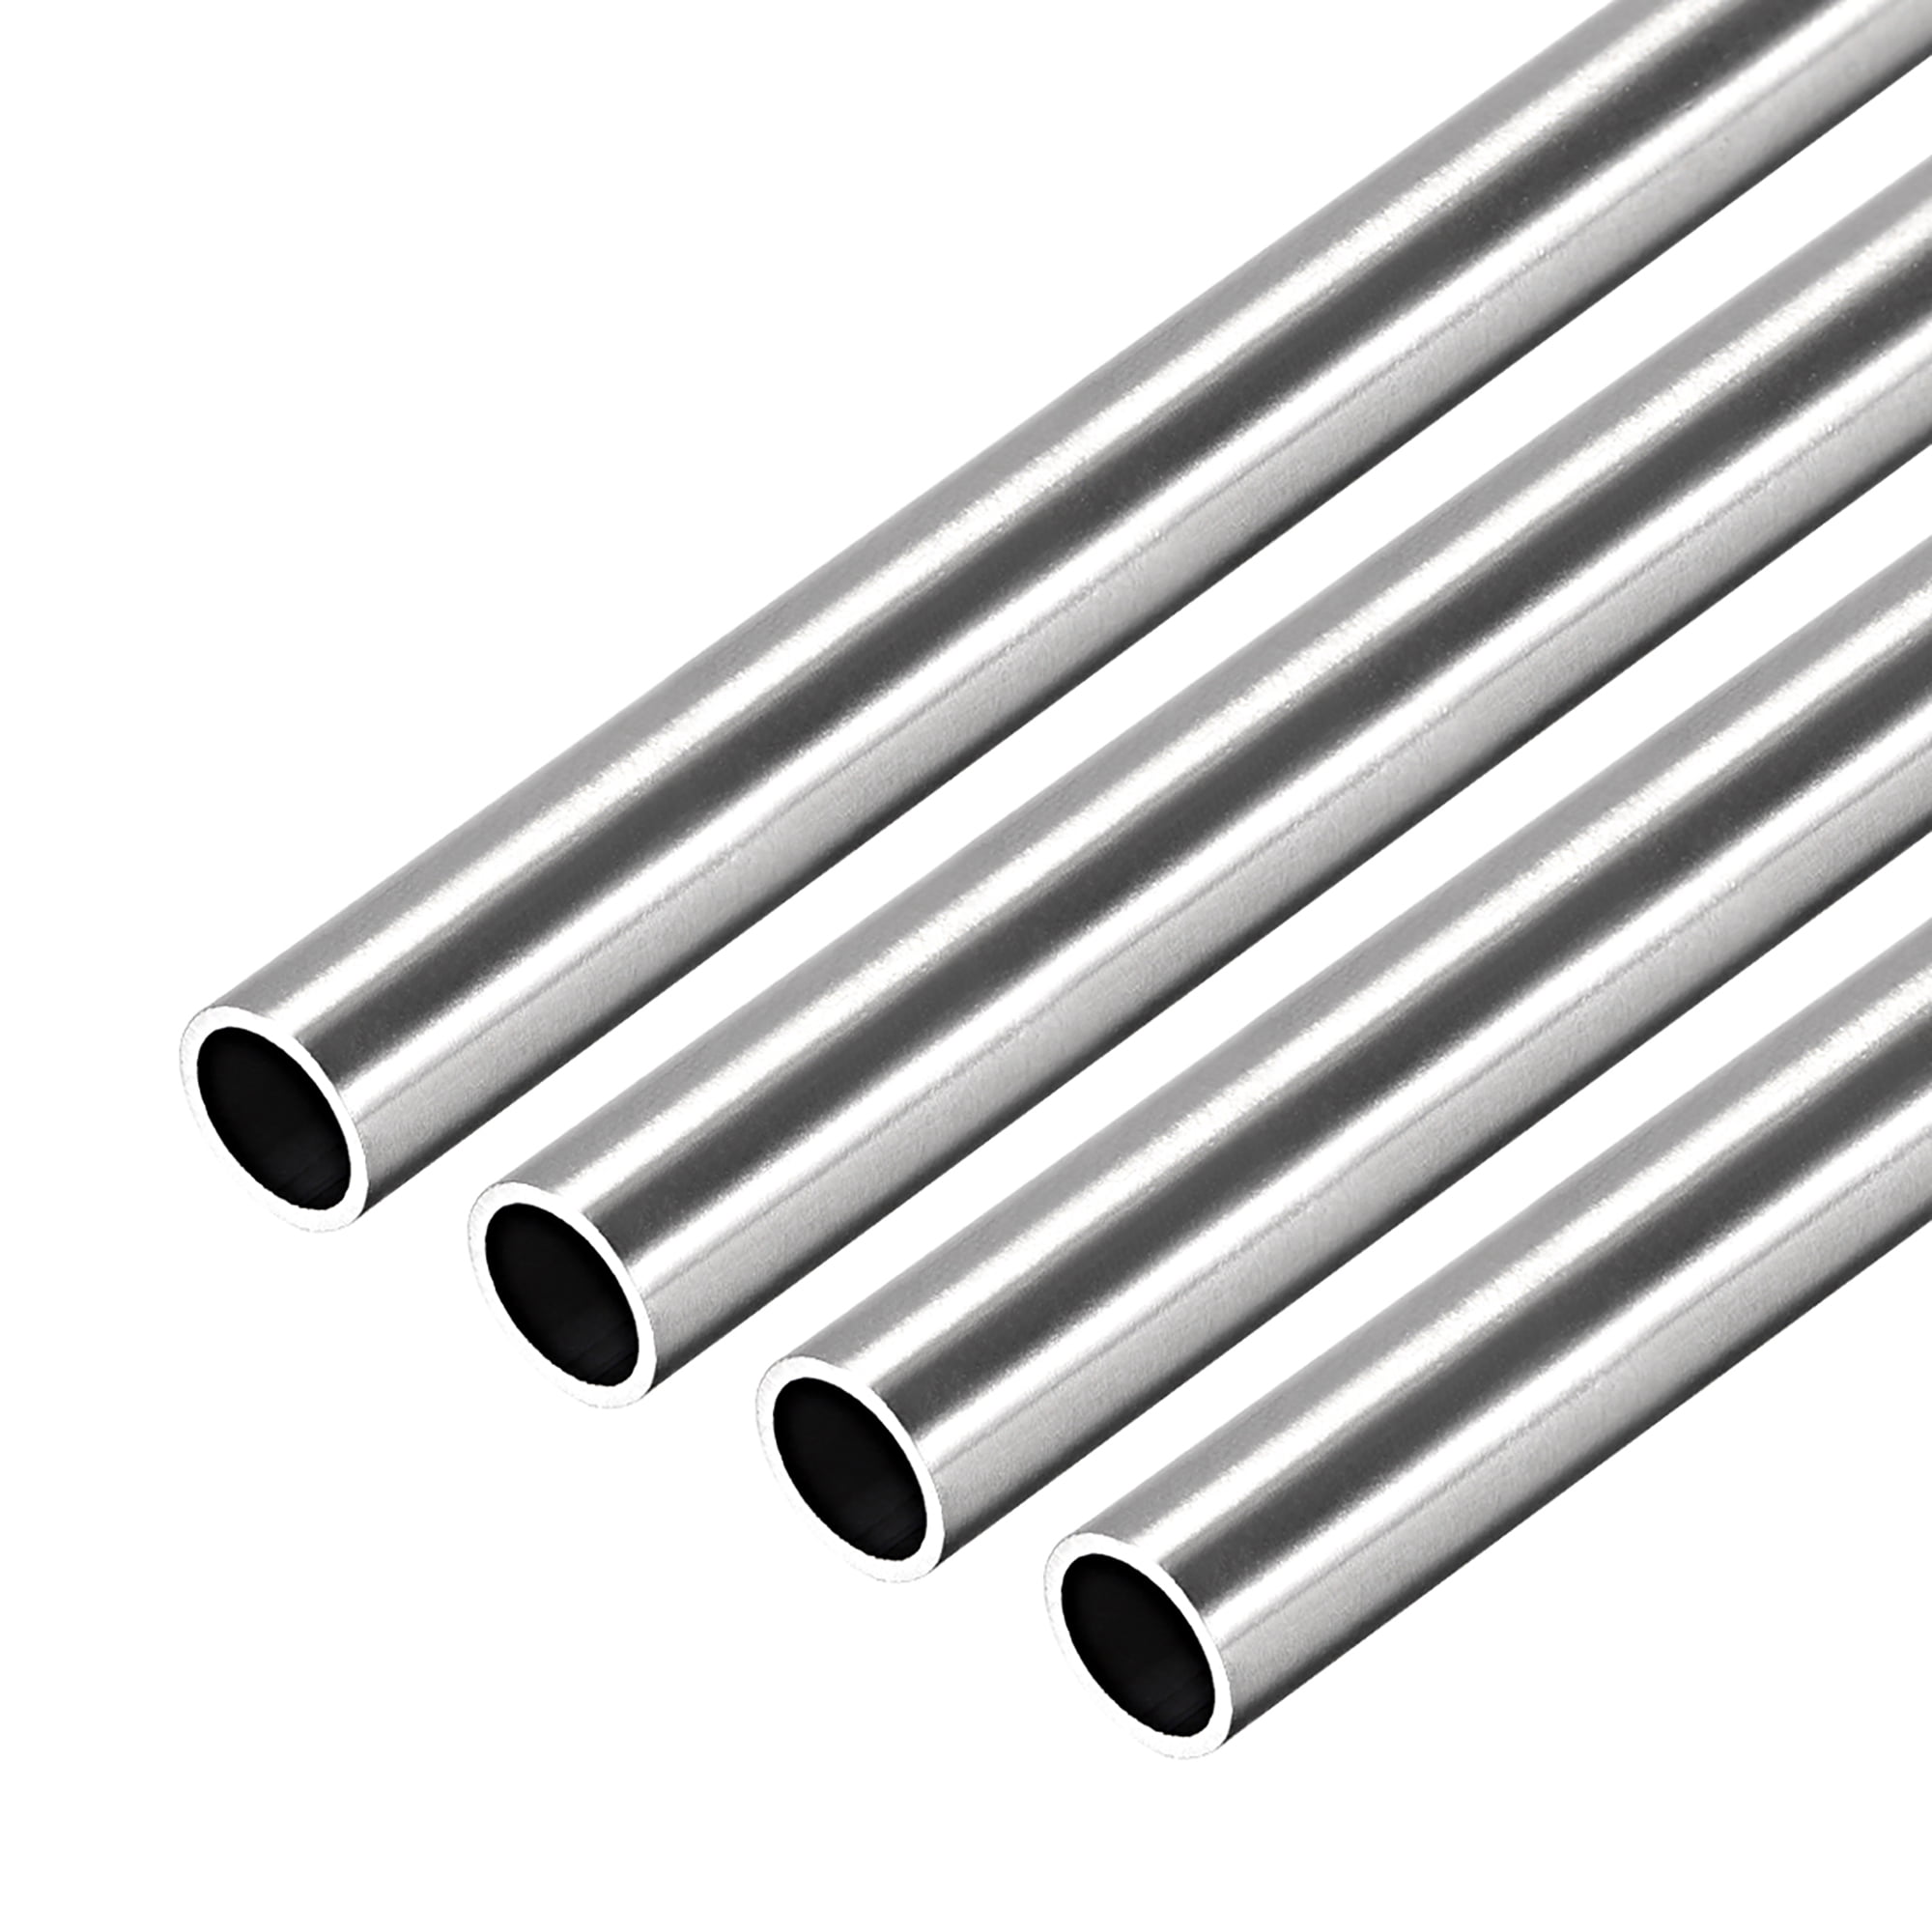 304 Stainless Steel Round Tubing 9mm OD 0.4mm Wall Thickness 250mm Length 2 Pcs 